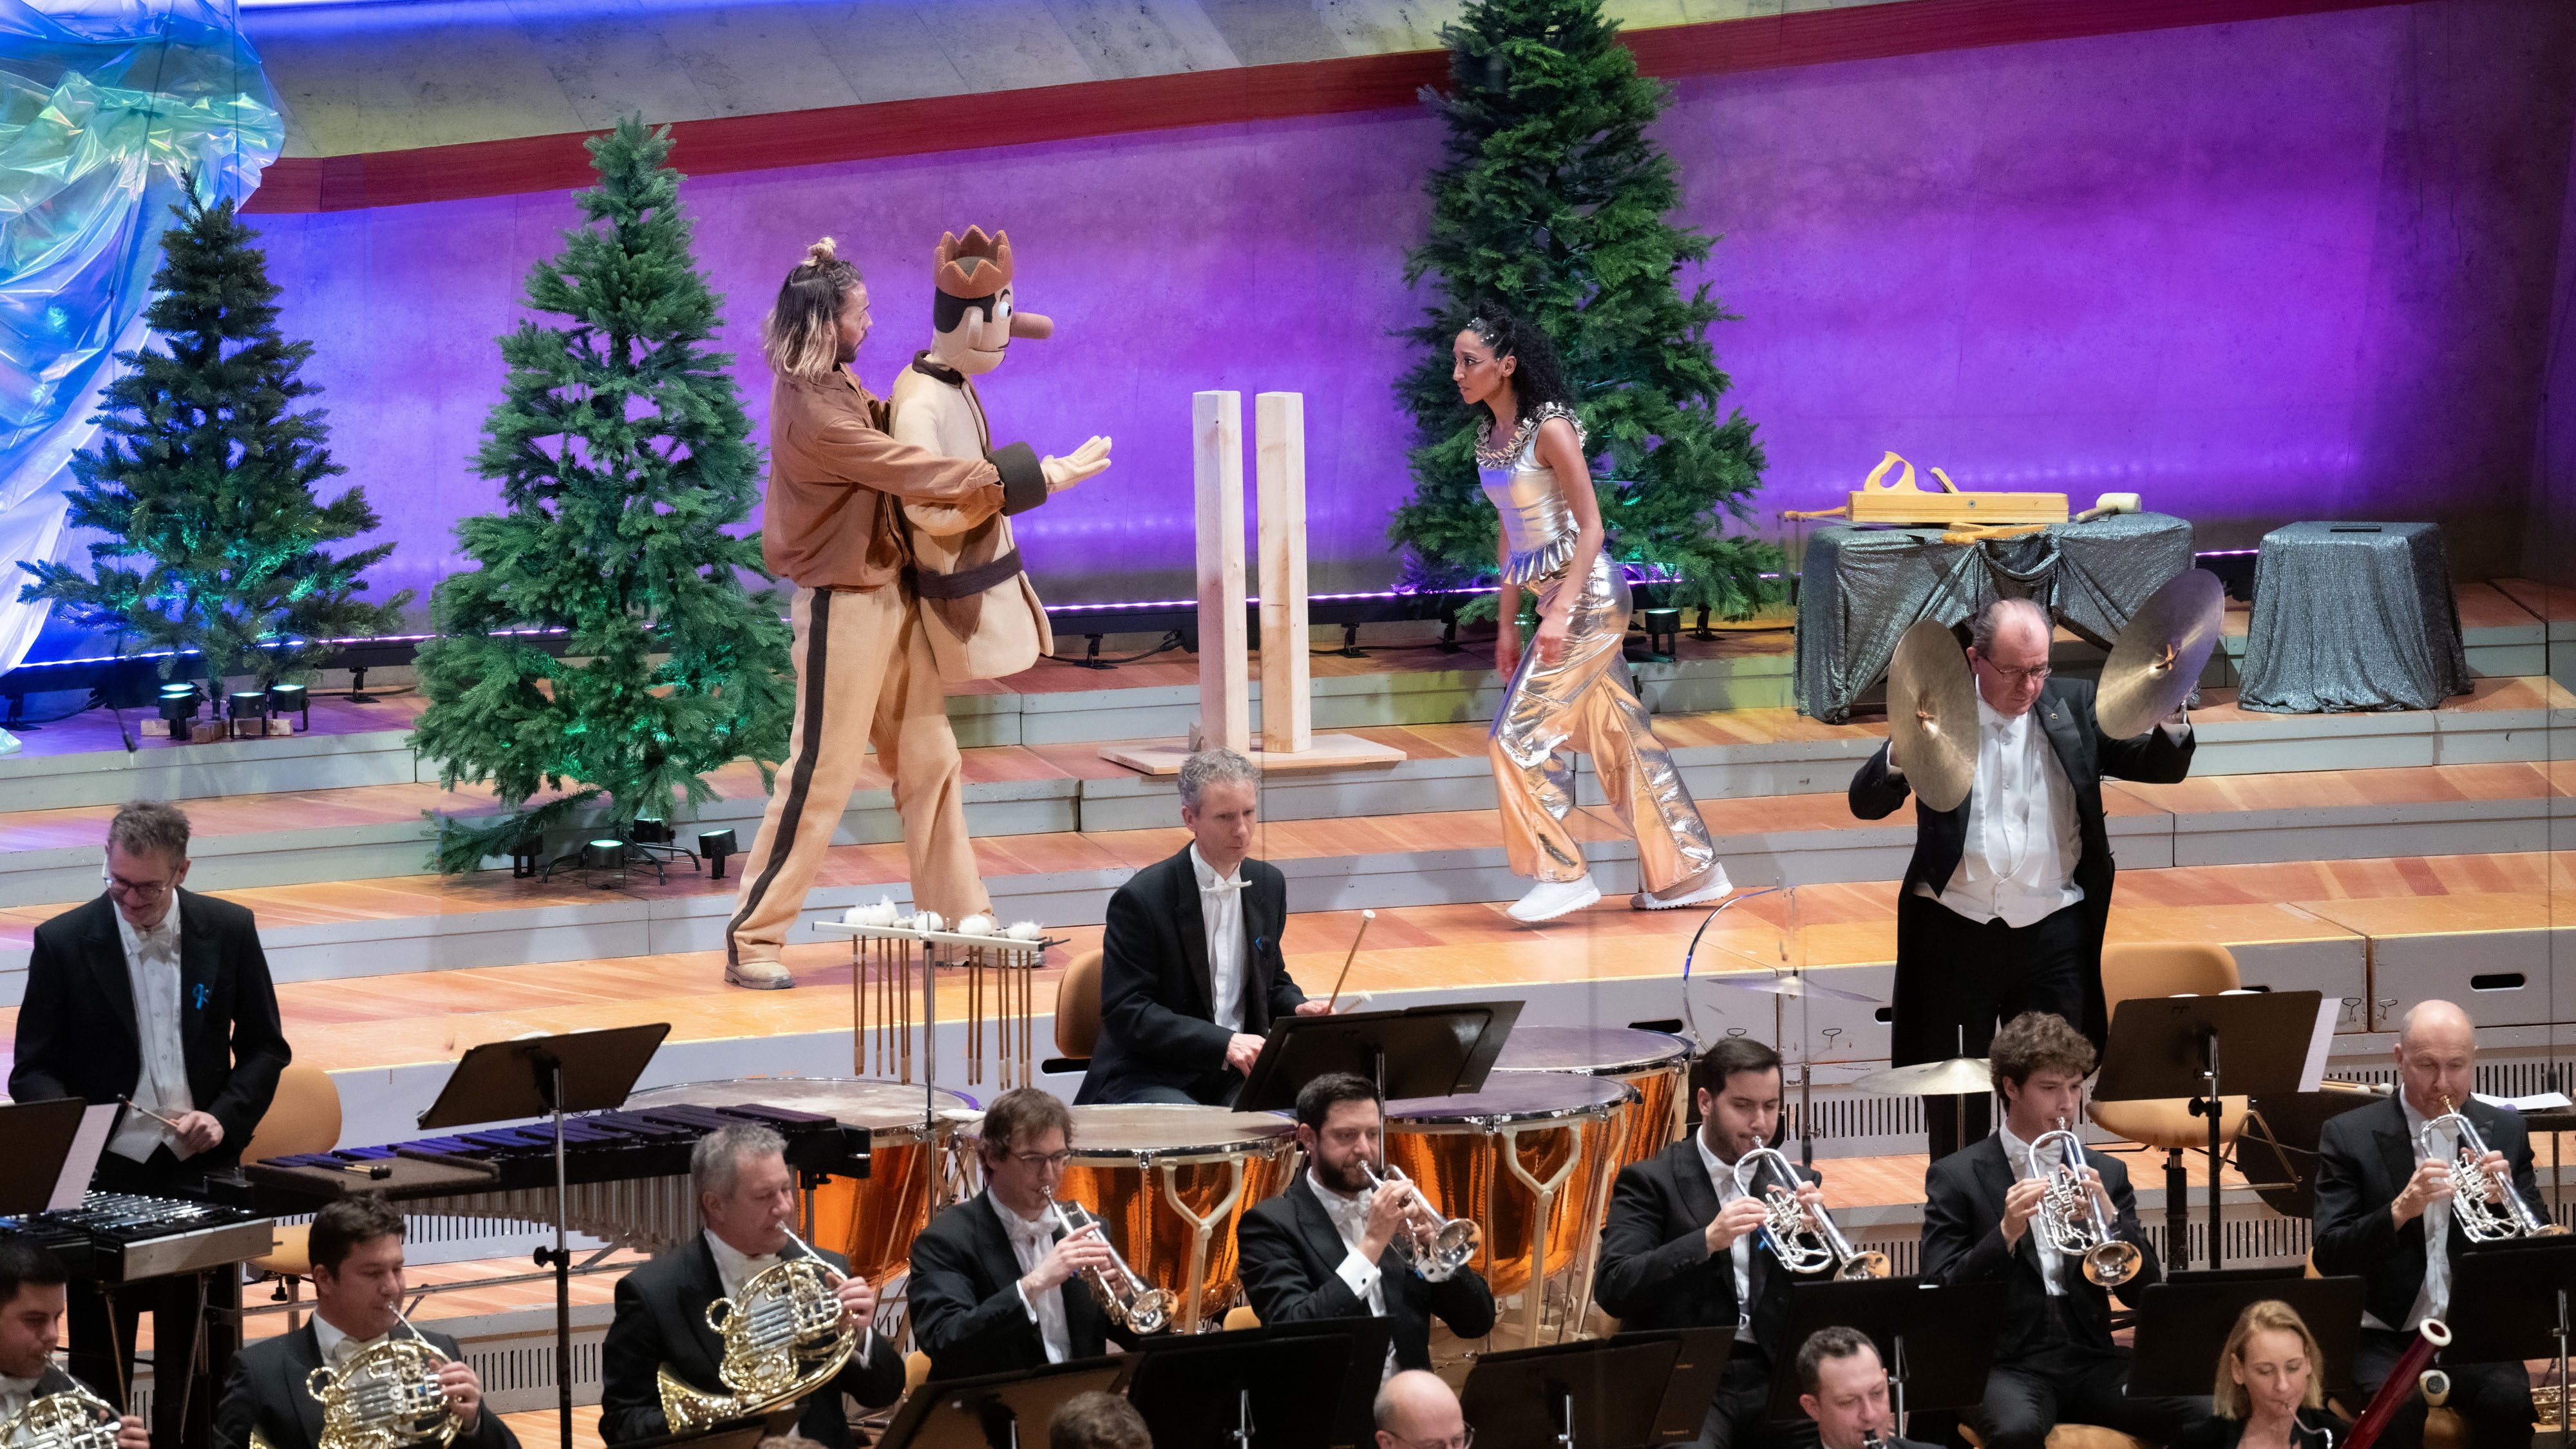 At the front, part of the orchestra can be seen on stage, at the back a man with a large prince puppet walks towards a dressed up woman